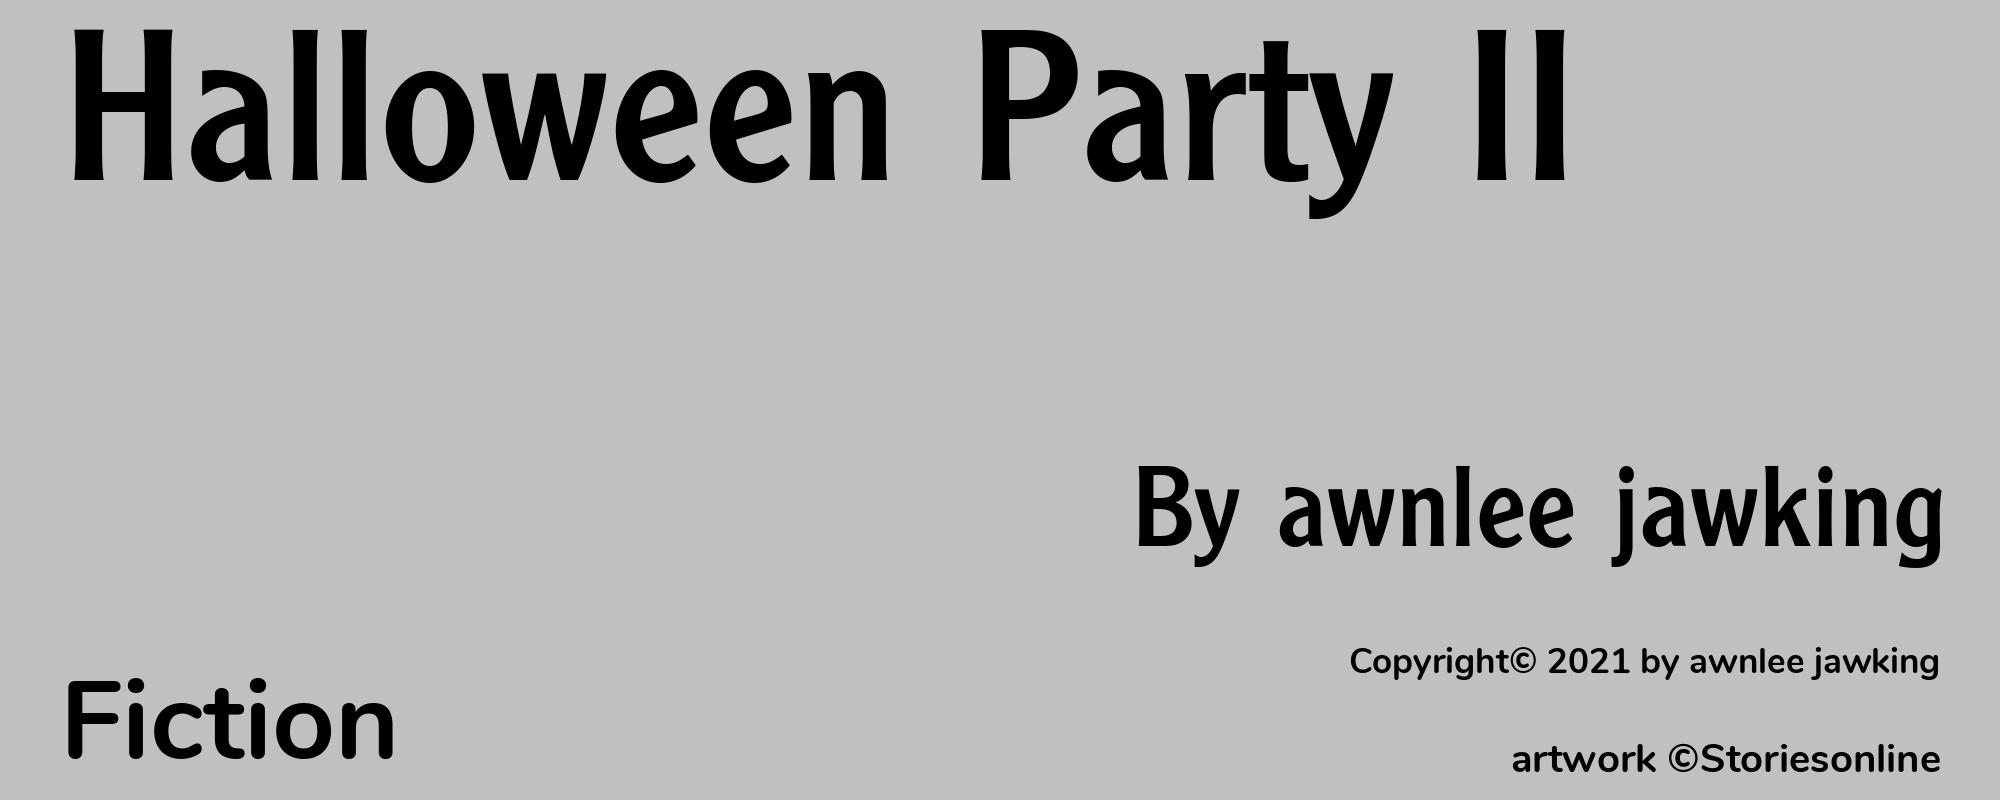 Halloween Party II - Cover